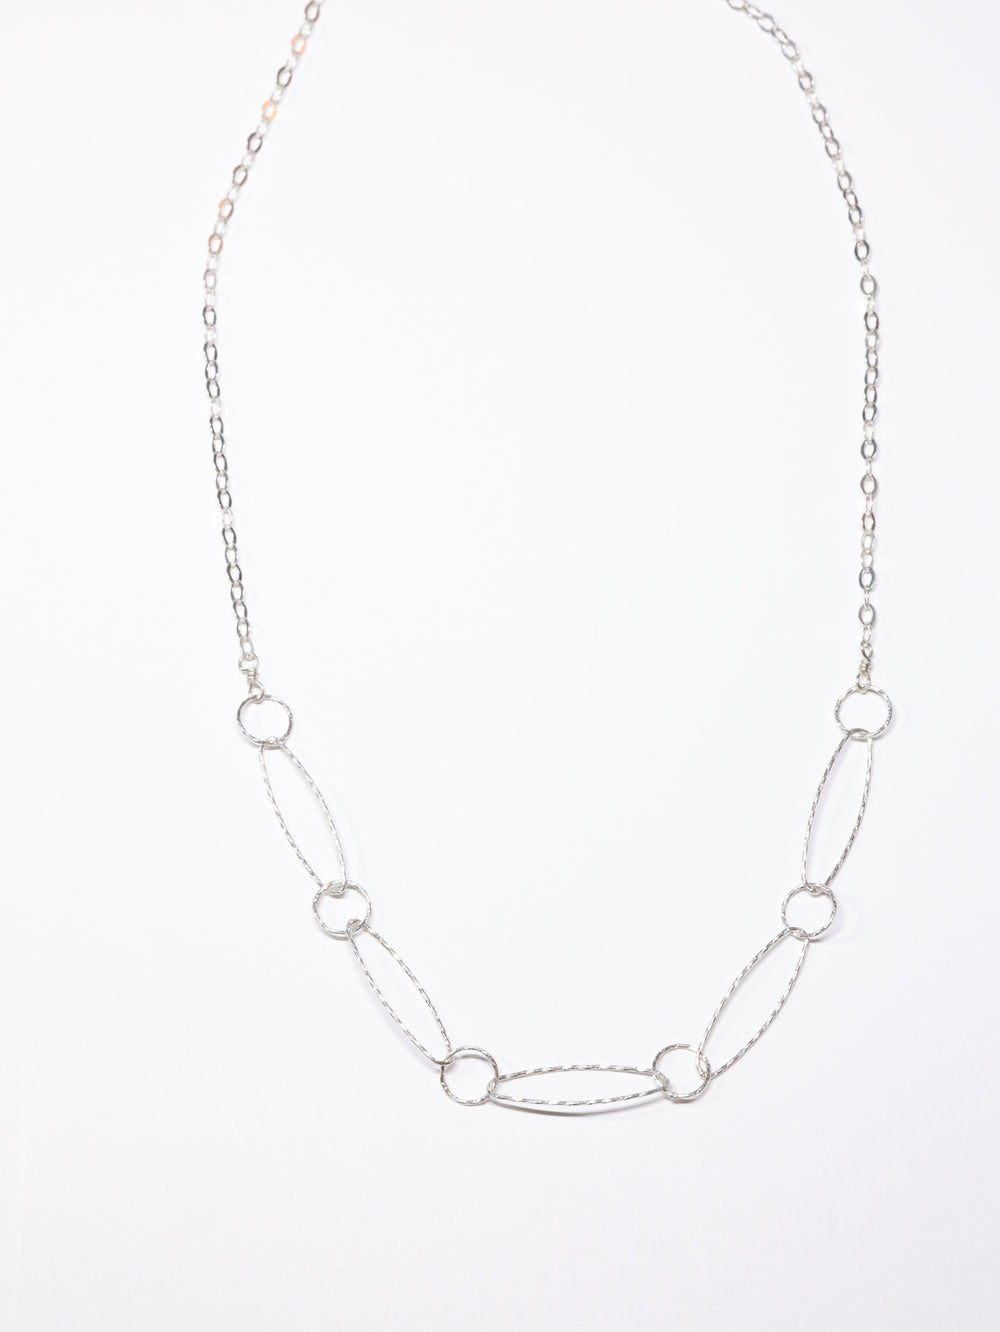 5 Links Necklace -Silver